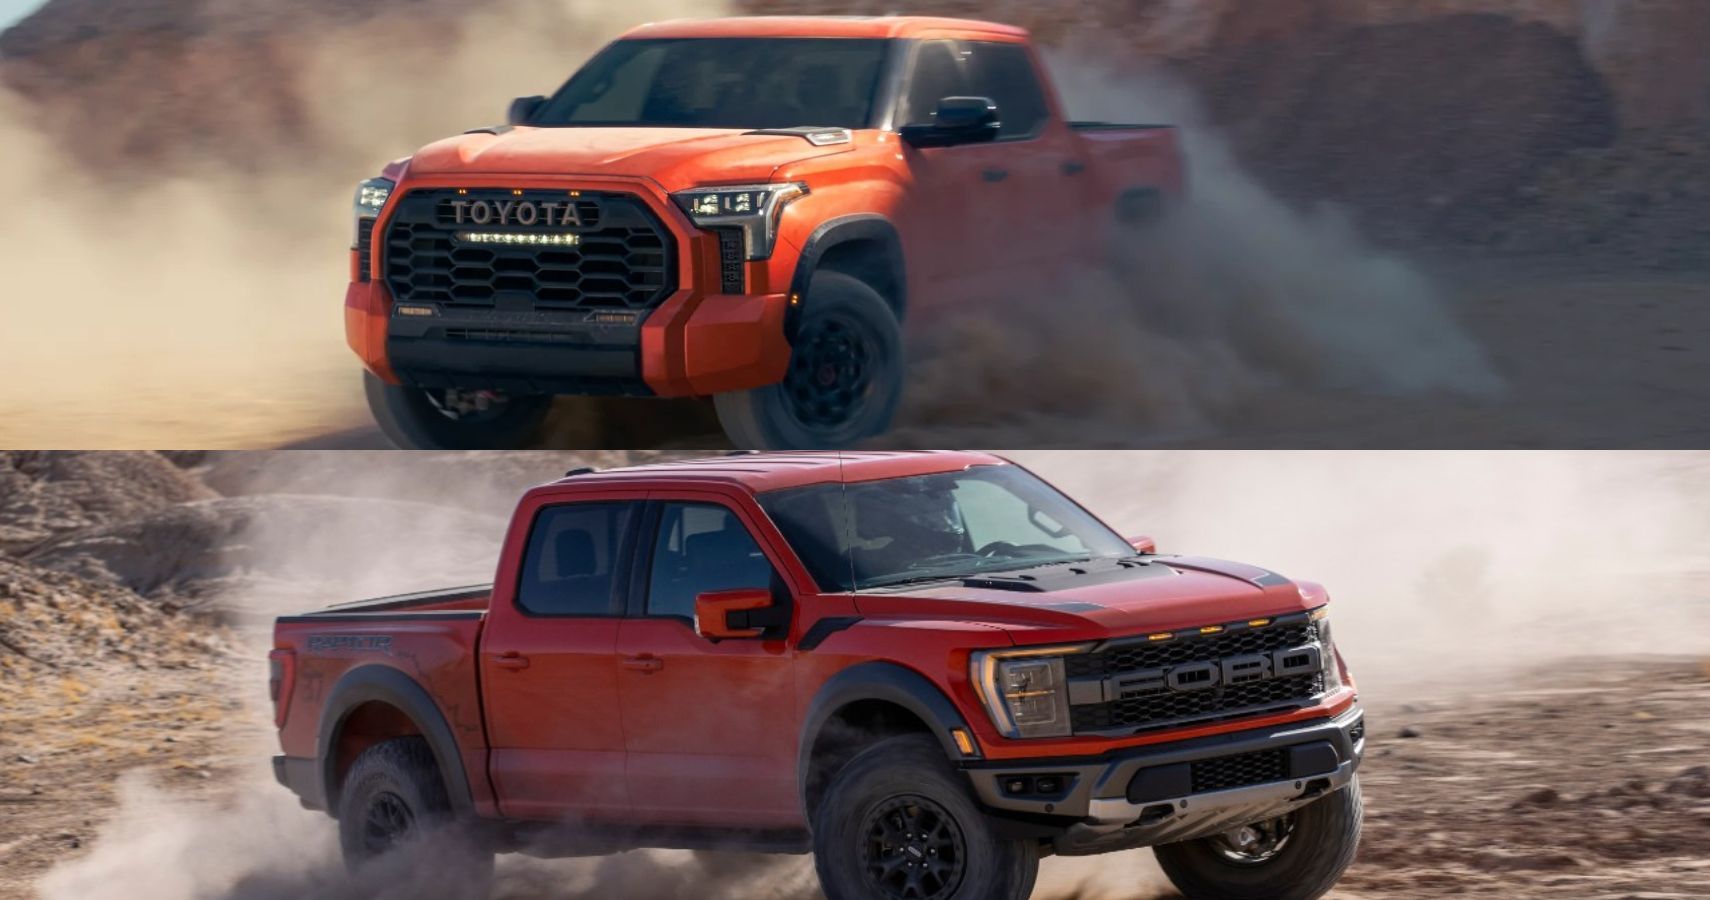 Toyota Tundra TRD Pro and Ford F-150 Raptor shaking up some dust